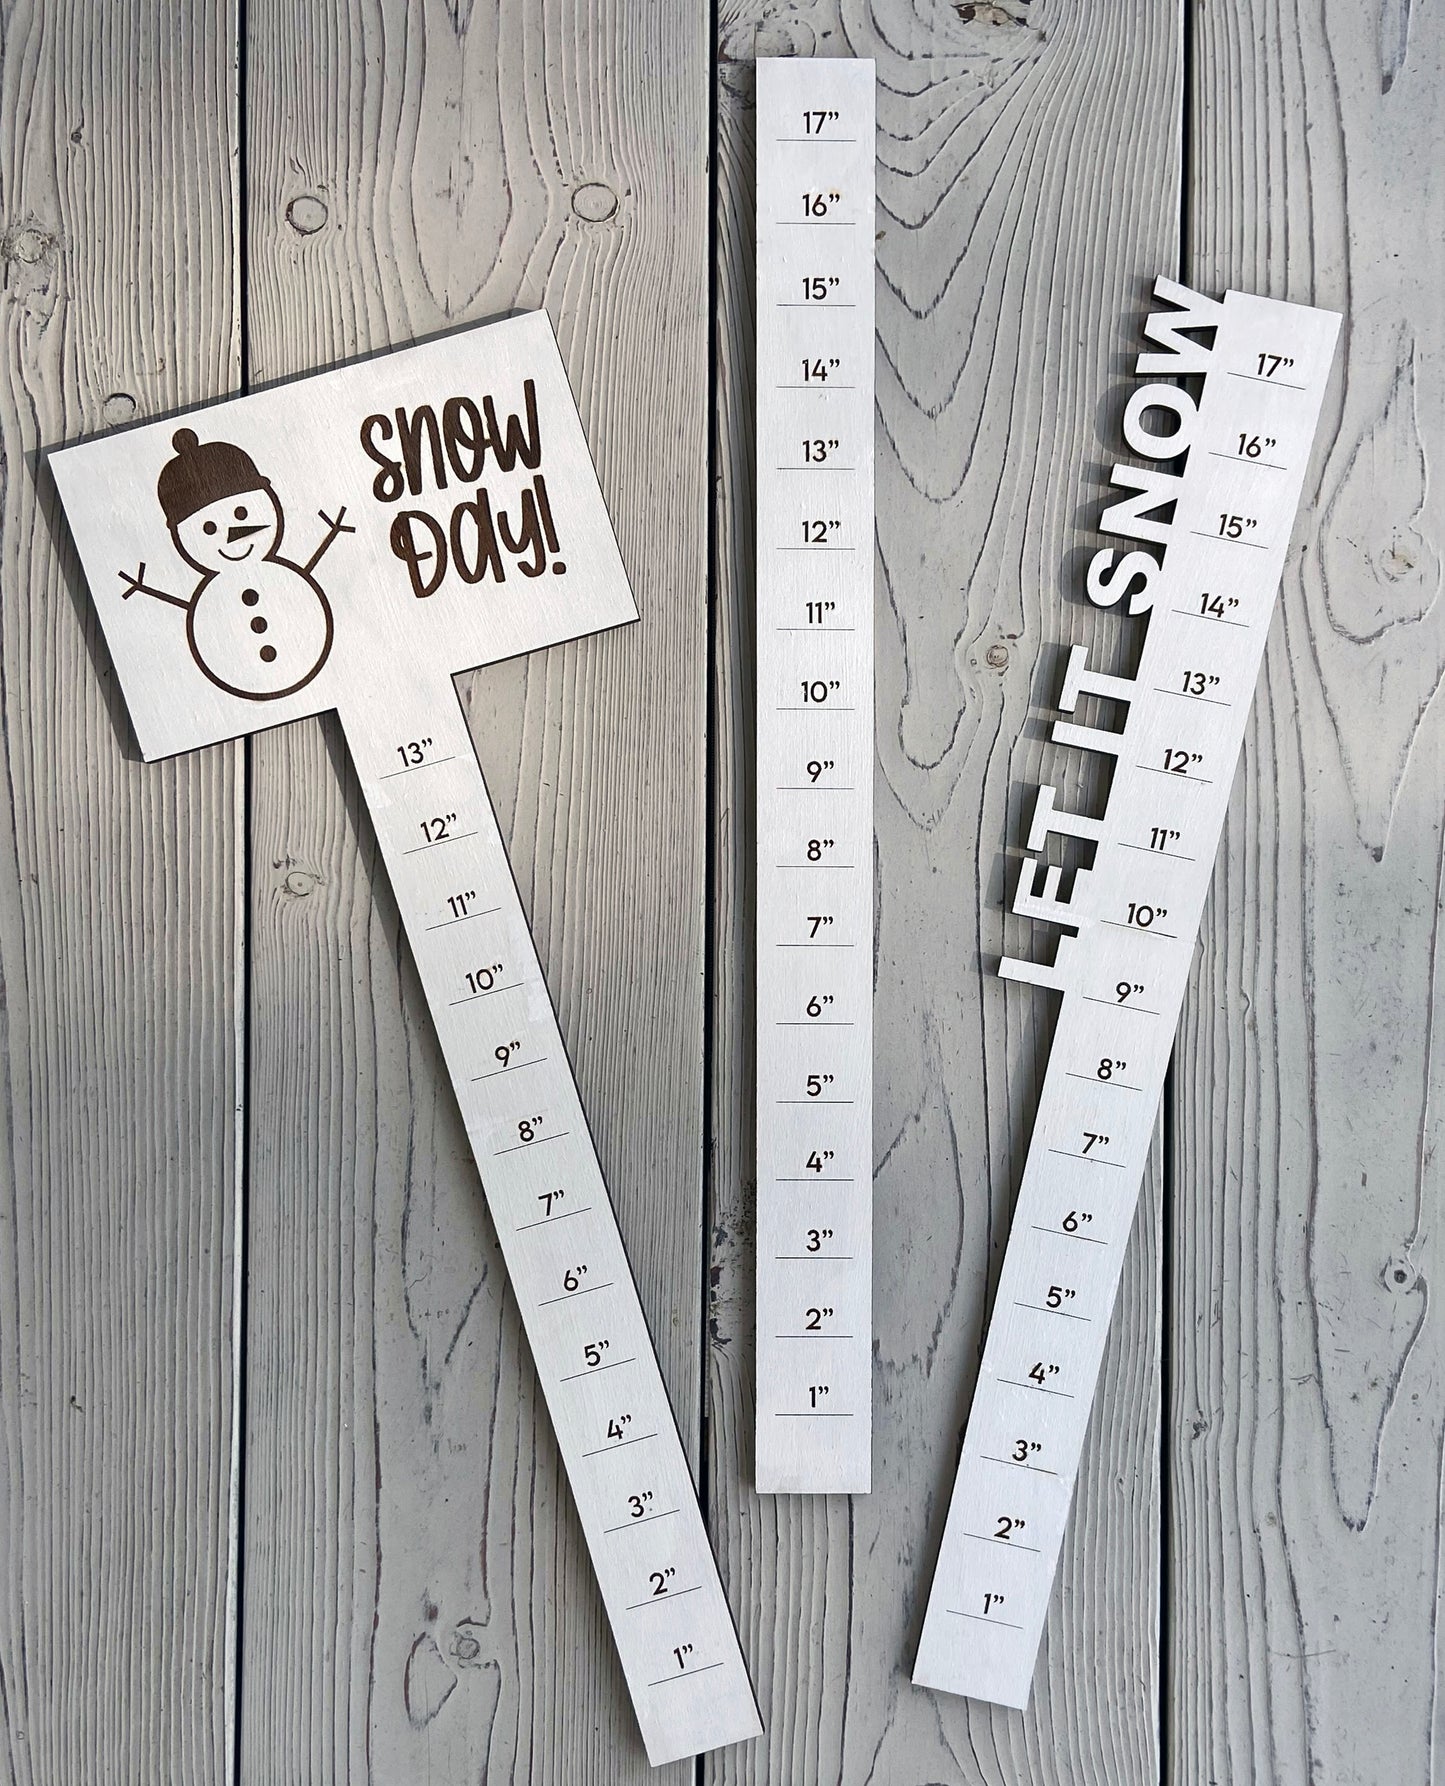 Snow Ruler - Ready to PLUNGE into the snow!